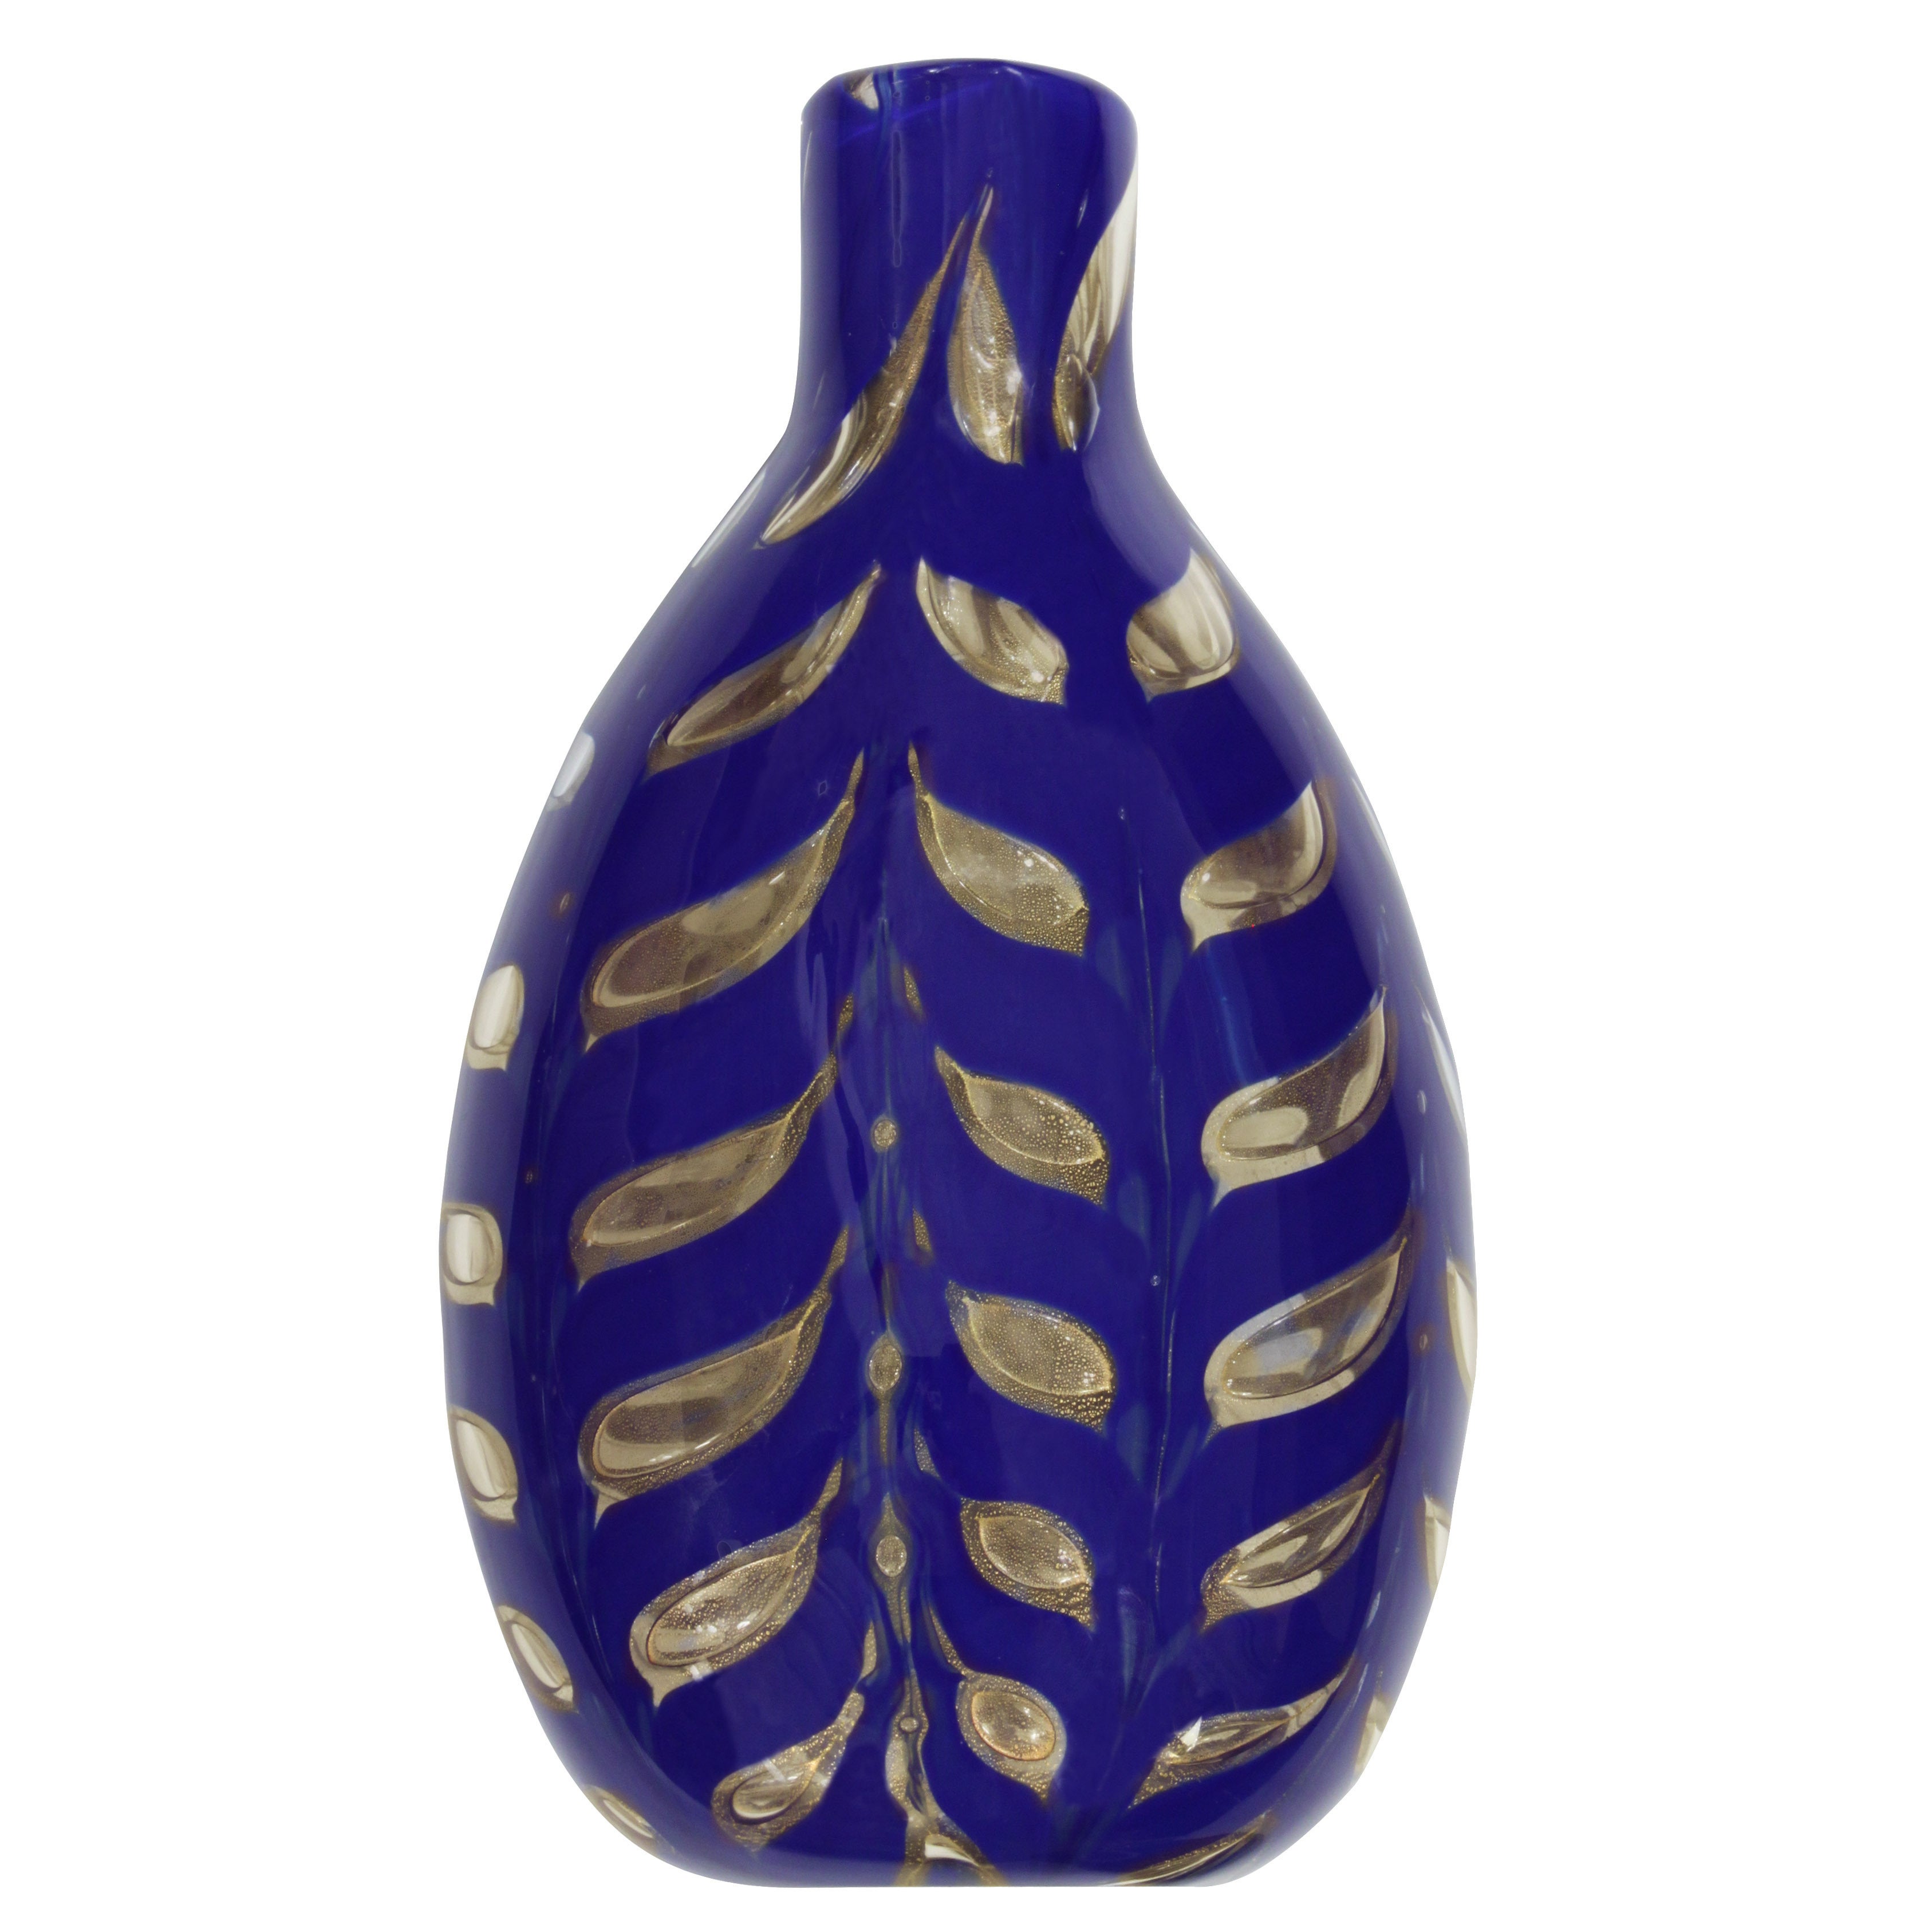 Handblown Glass "Graffito" Vase with Gold Foil by Barovier e Toso